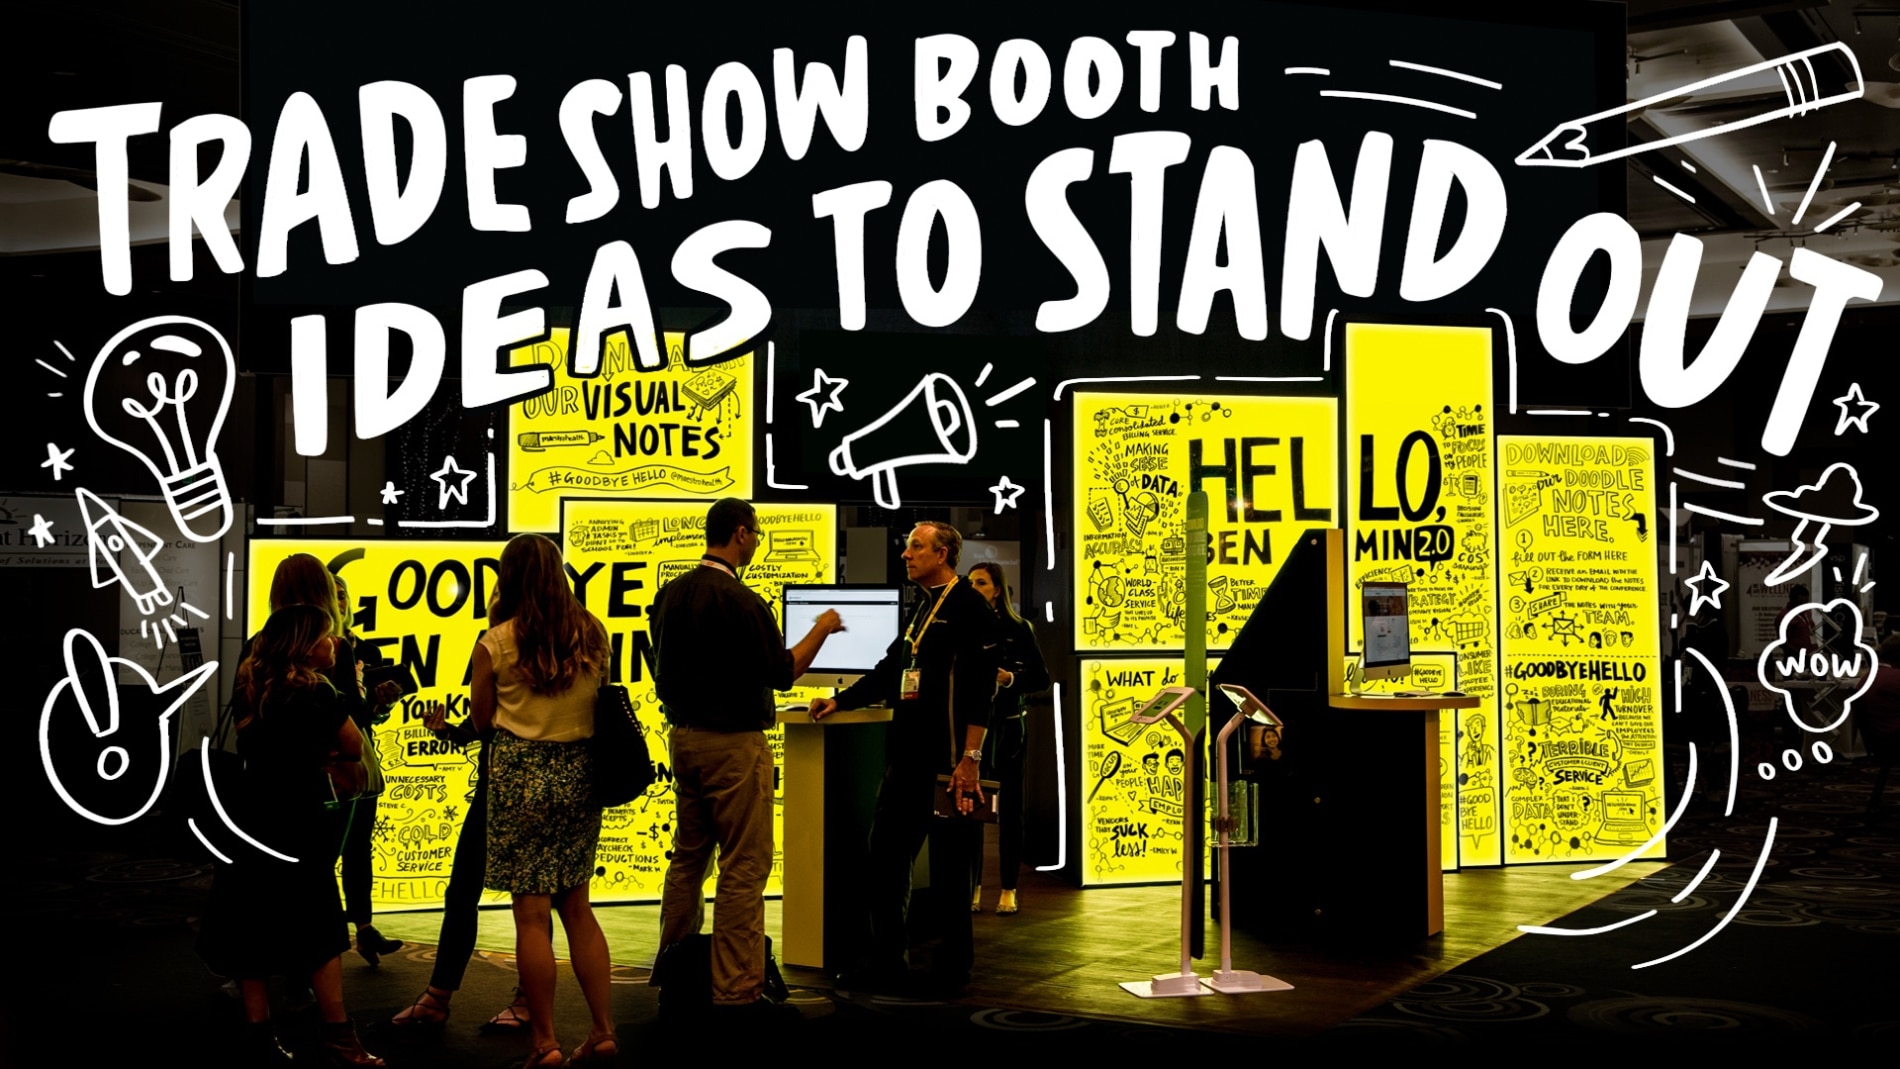 Three Trade Show Booth Ideas Guaranteed to Stand Out